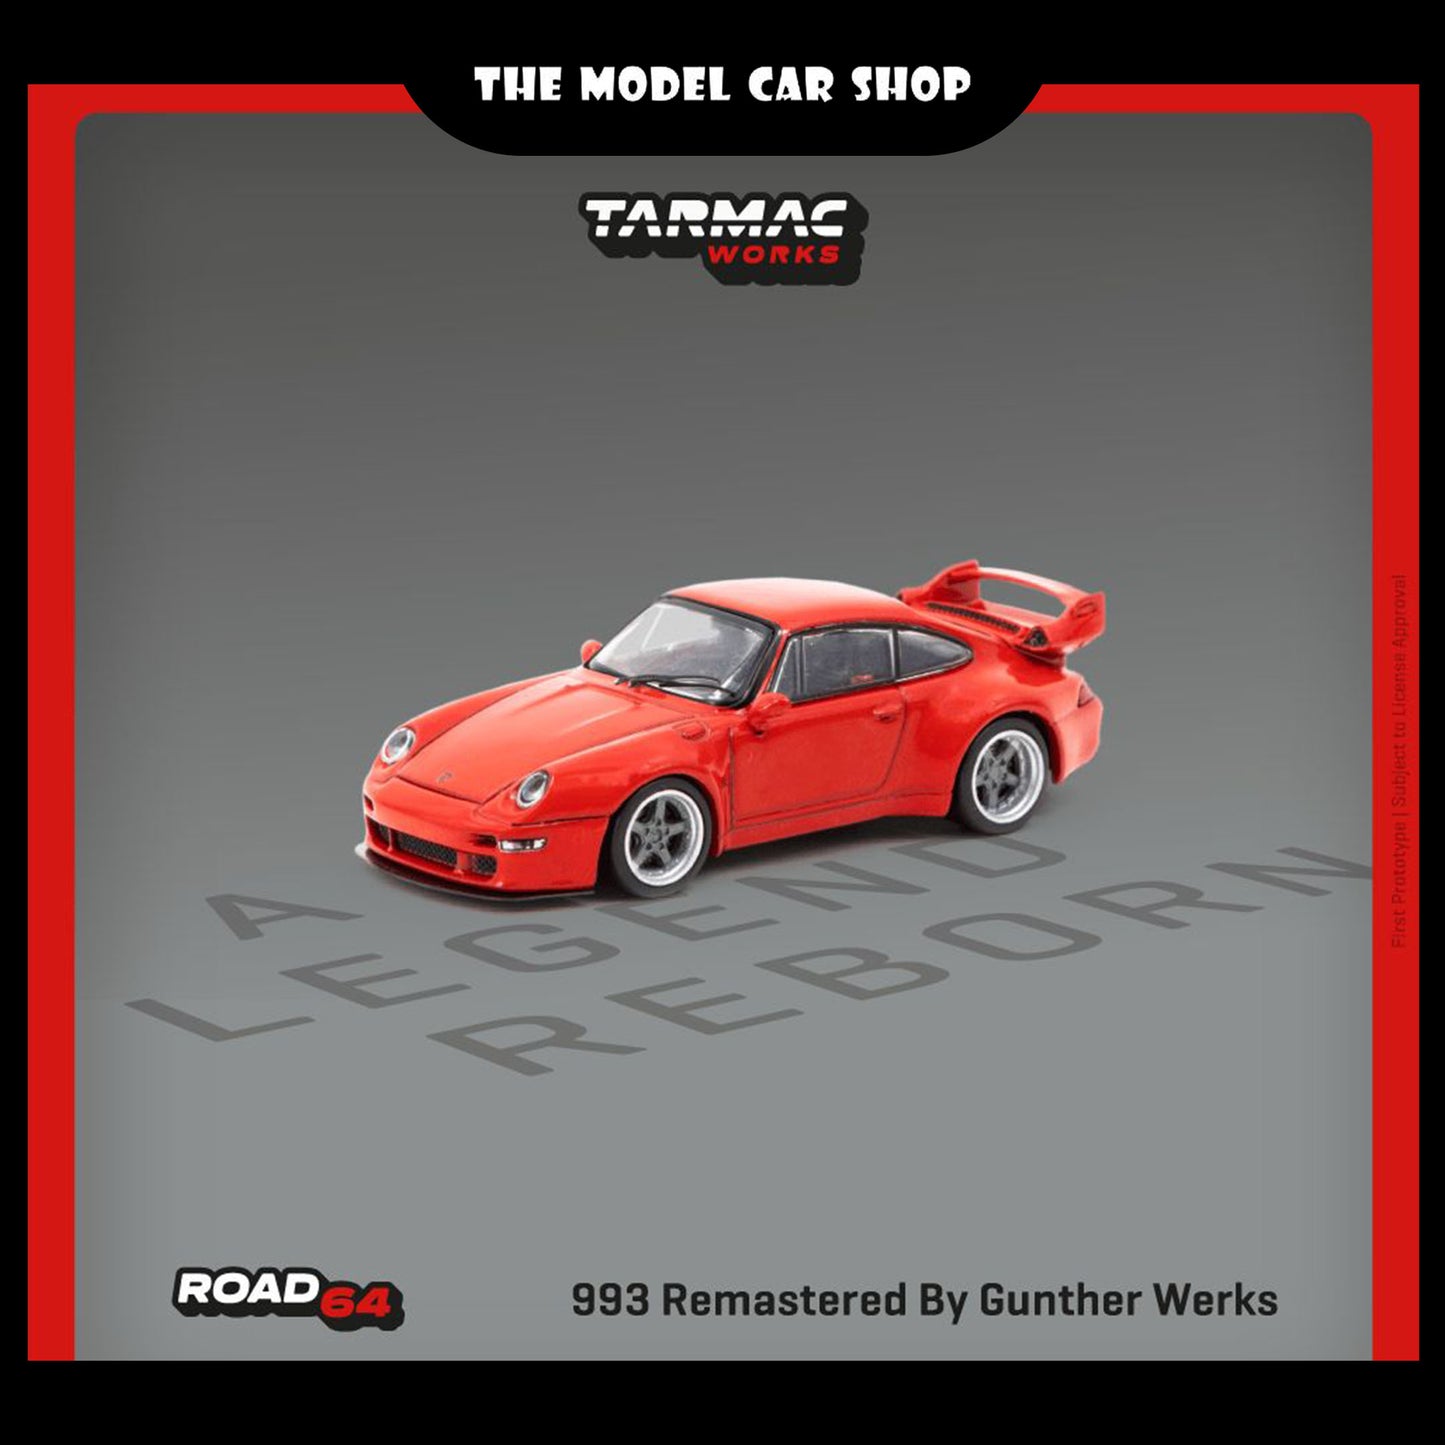 [Tarmac Works] 993 Remastered By Gunther Werks - Red